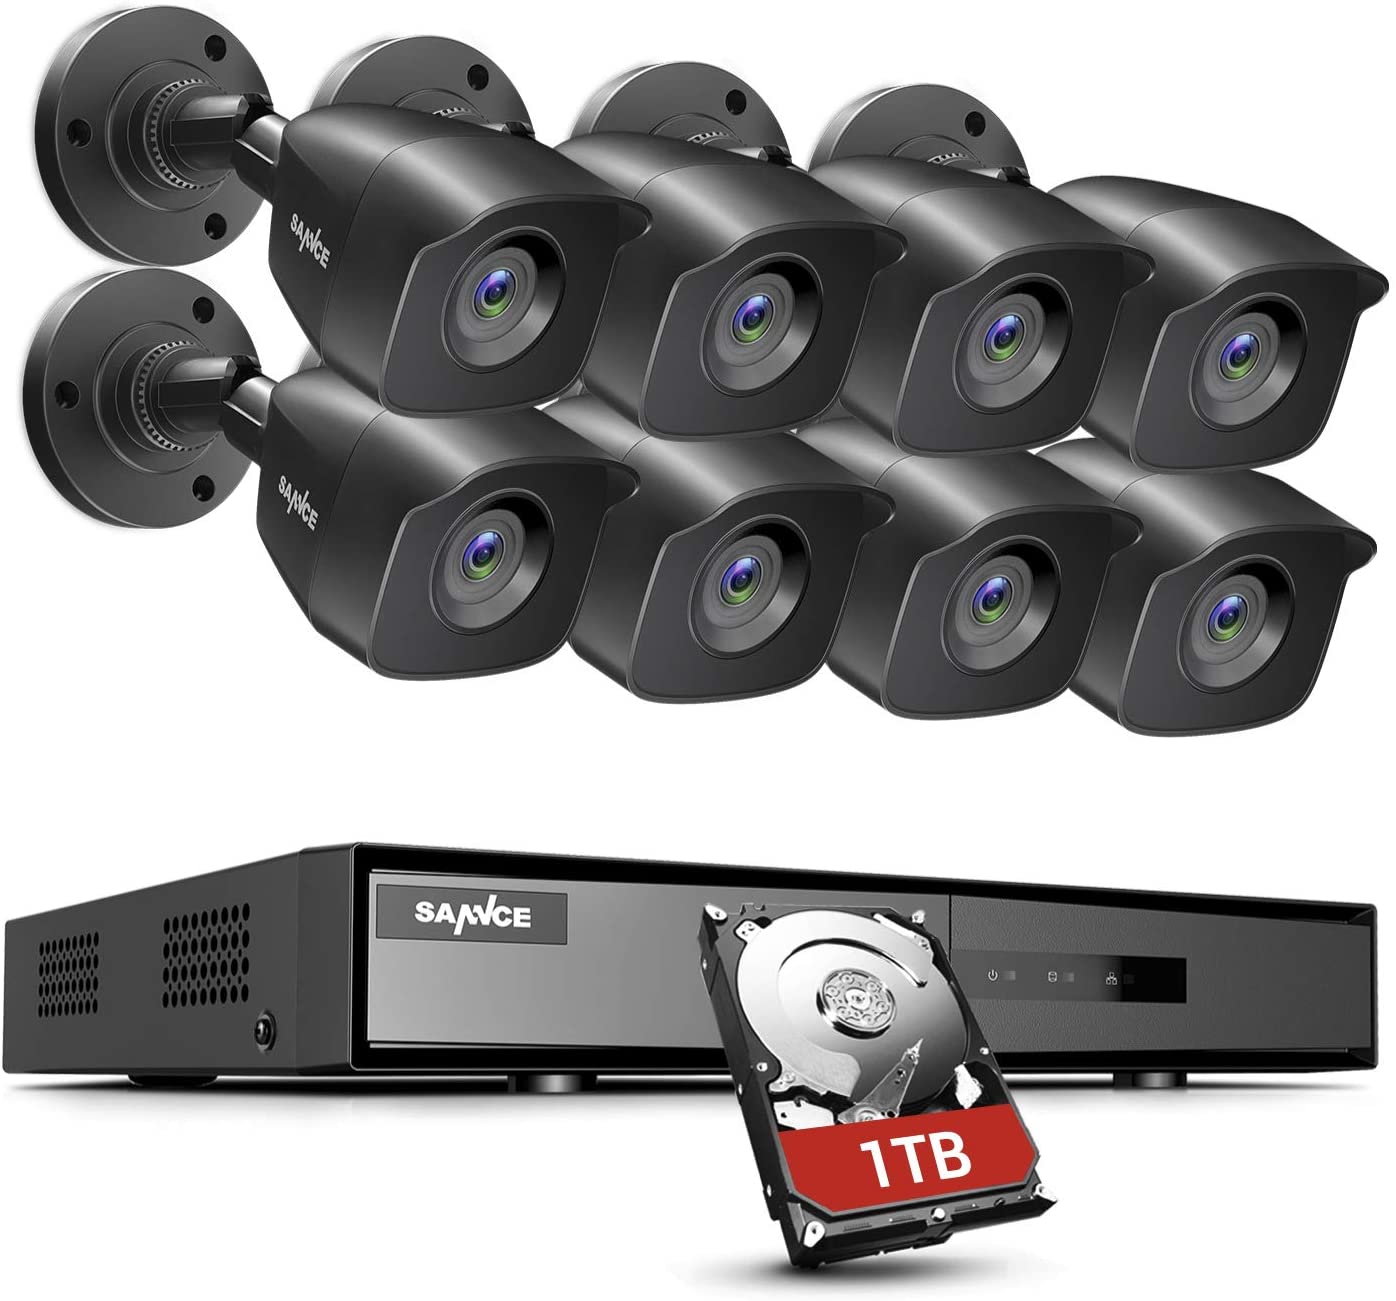 SANNCE 8CH 1080P Lite Home Security Camera System with 8x1080P Indoor/Outdoor Surveillance Cameras and 1TB Hard Disk Included for $209.99 AC